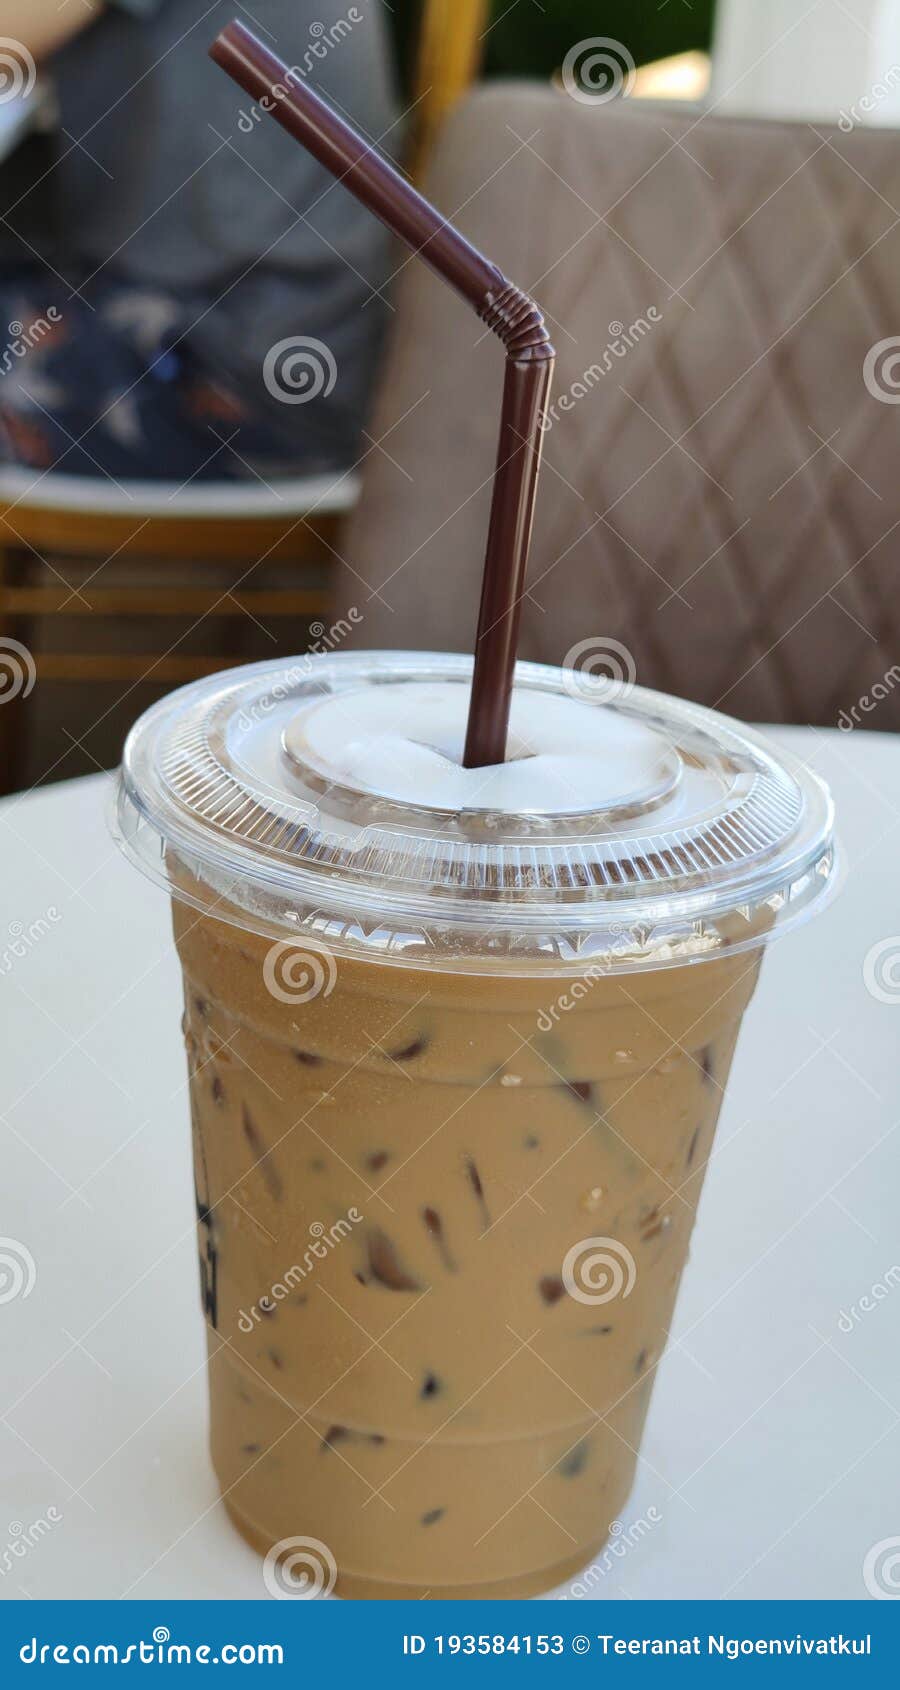 https://thumbs.dreamstime.com/z/freshness-iced-coffee-cafe-latte-disposable-take-away-cup-brown-straw-advsertising-backgrounds-193584153.jpg